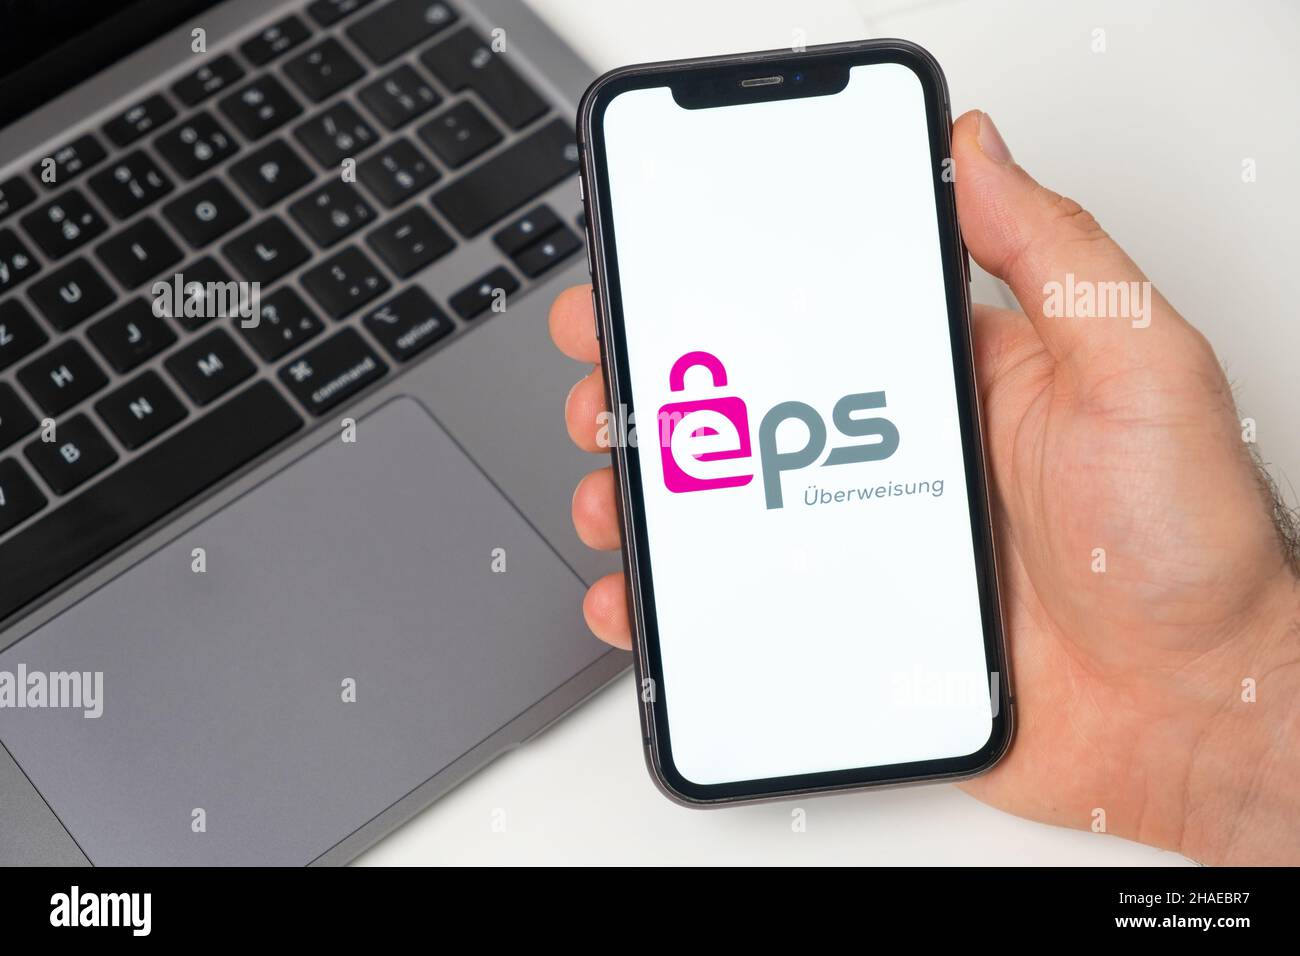 eps uberweisung crypto wallet logo on the screen of mobile phone and notebook on the background, November 2021, San Francisco, USA. November 2021, San Francisco, USA Stock Photo